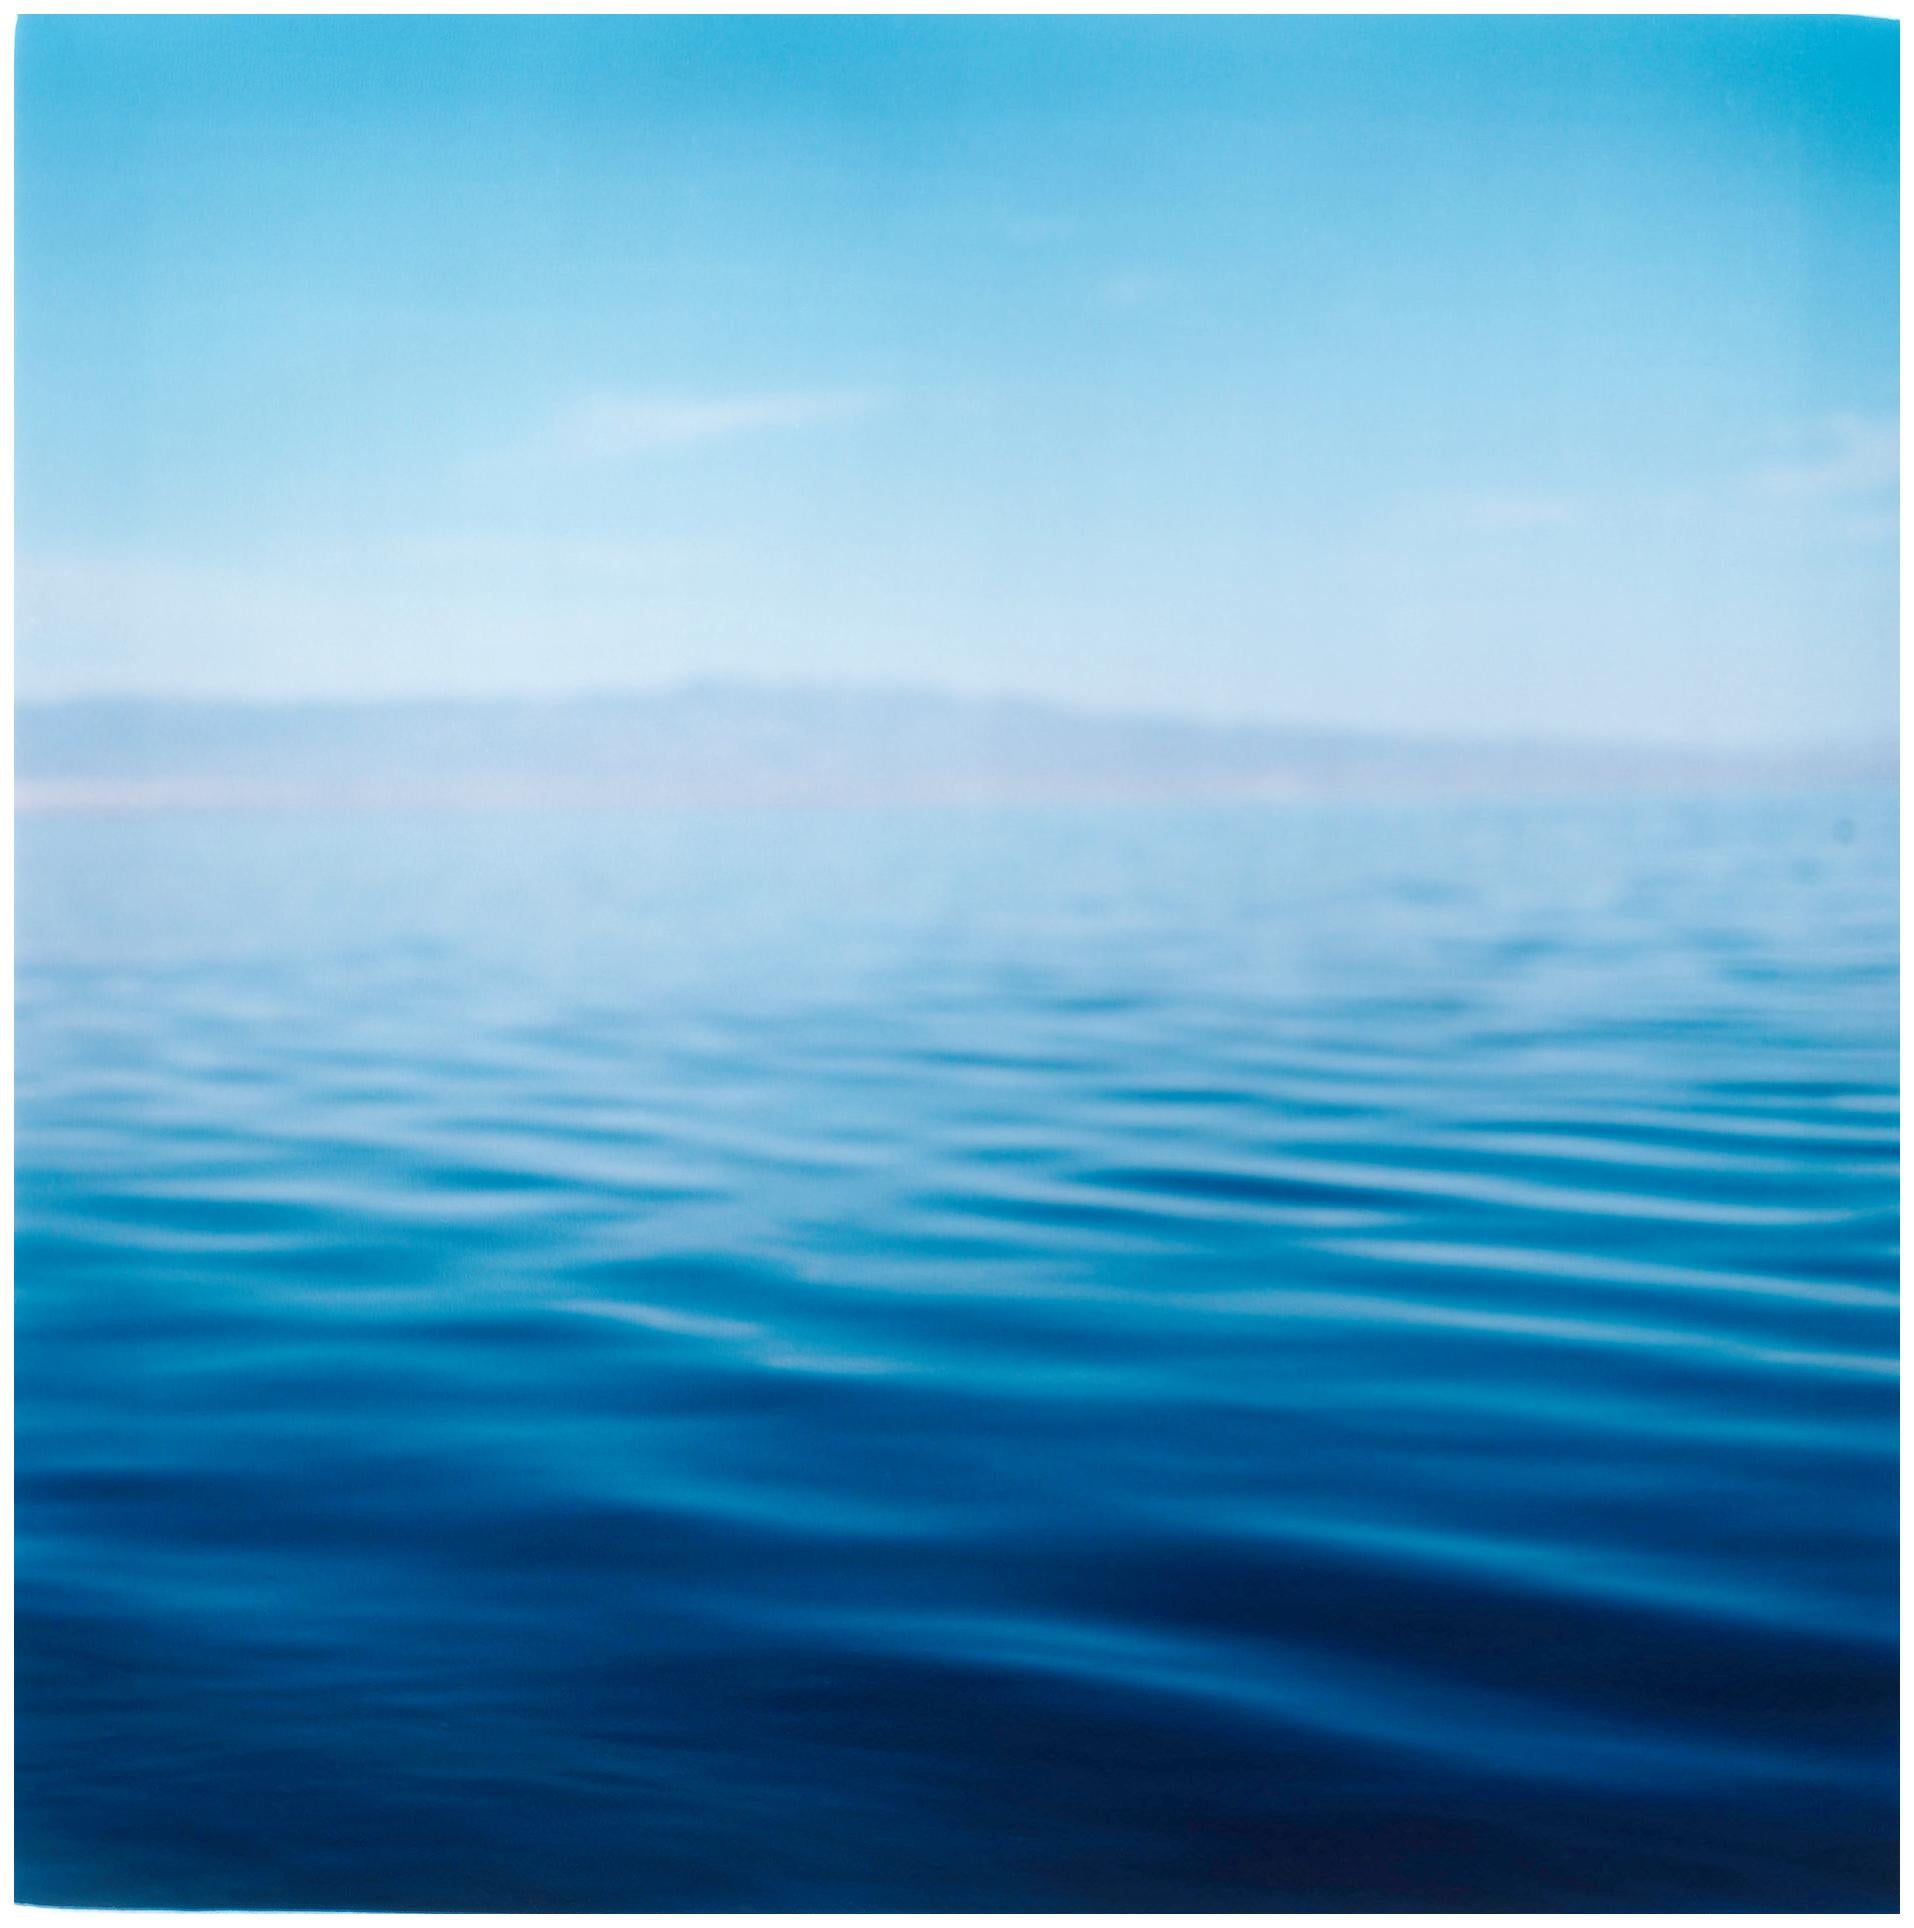 Shades of blue in this peaceful, almost abstract photograph of the Salton Sea, California. Artwork by film photographer Richard Heeps printed from negative in his darkroom.

This artwork is a limited edition of 25, gloss photographic print,